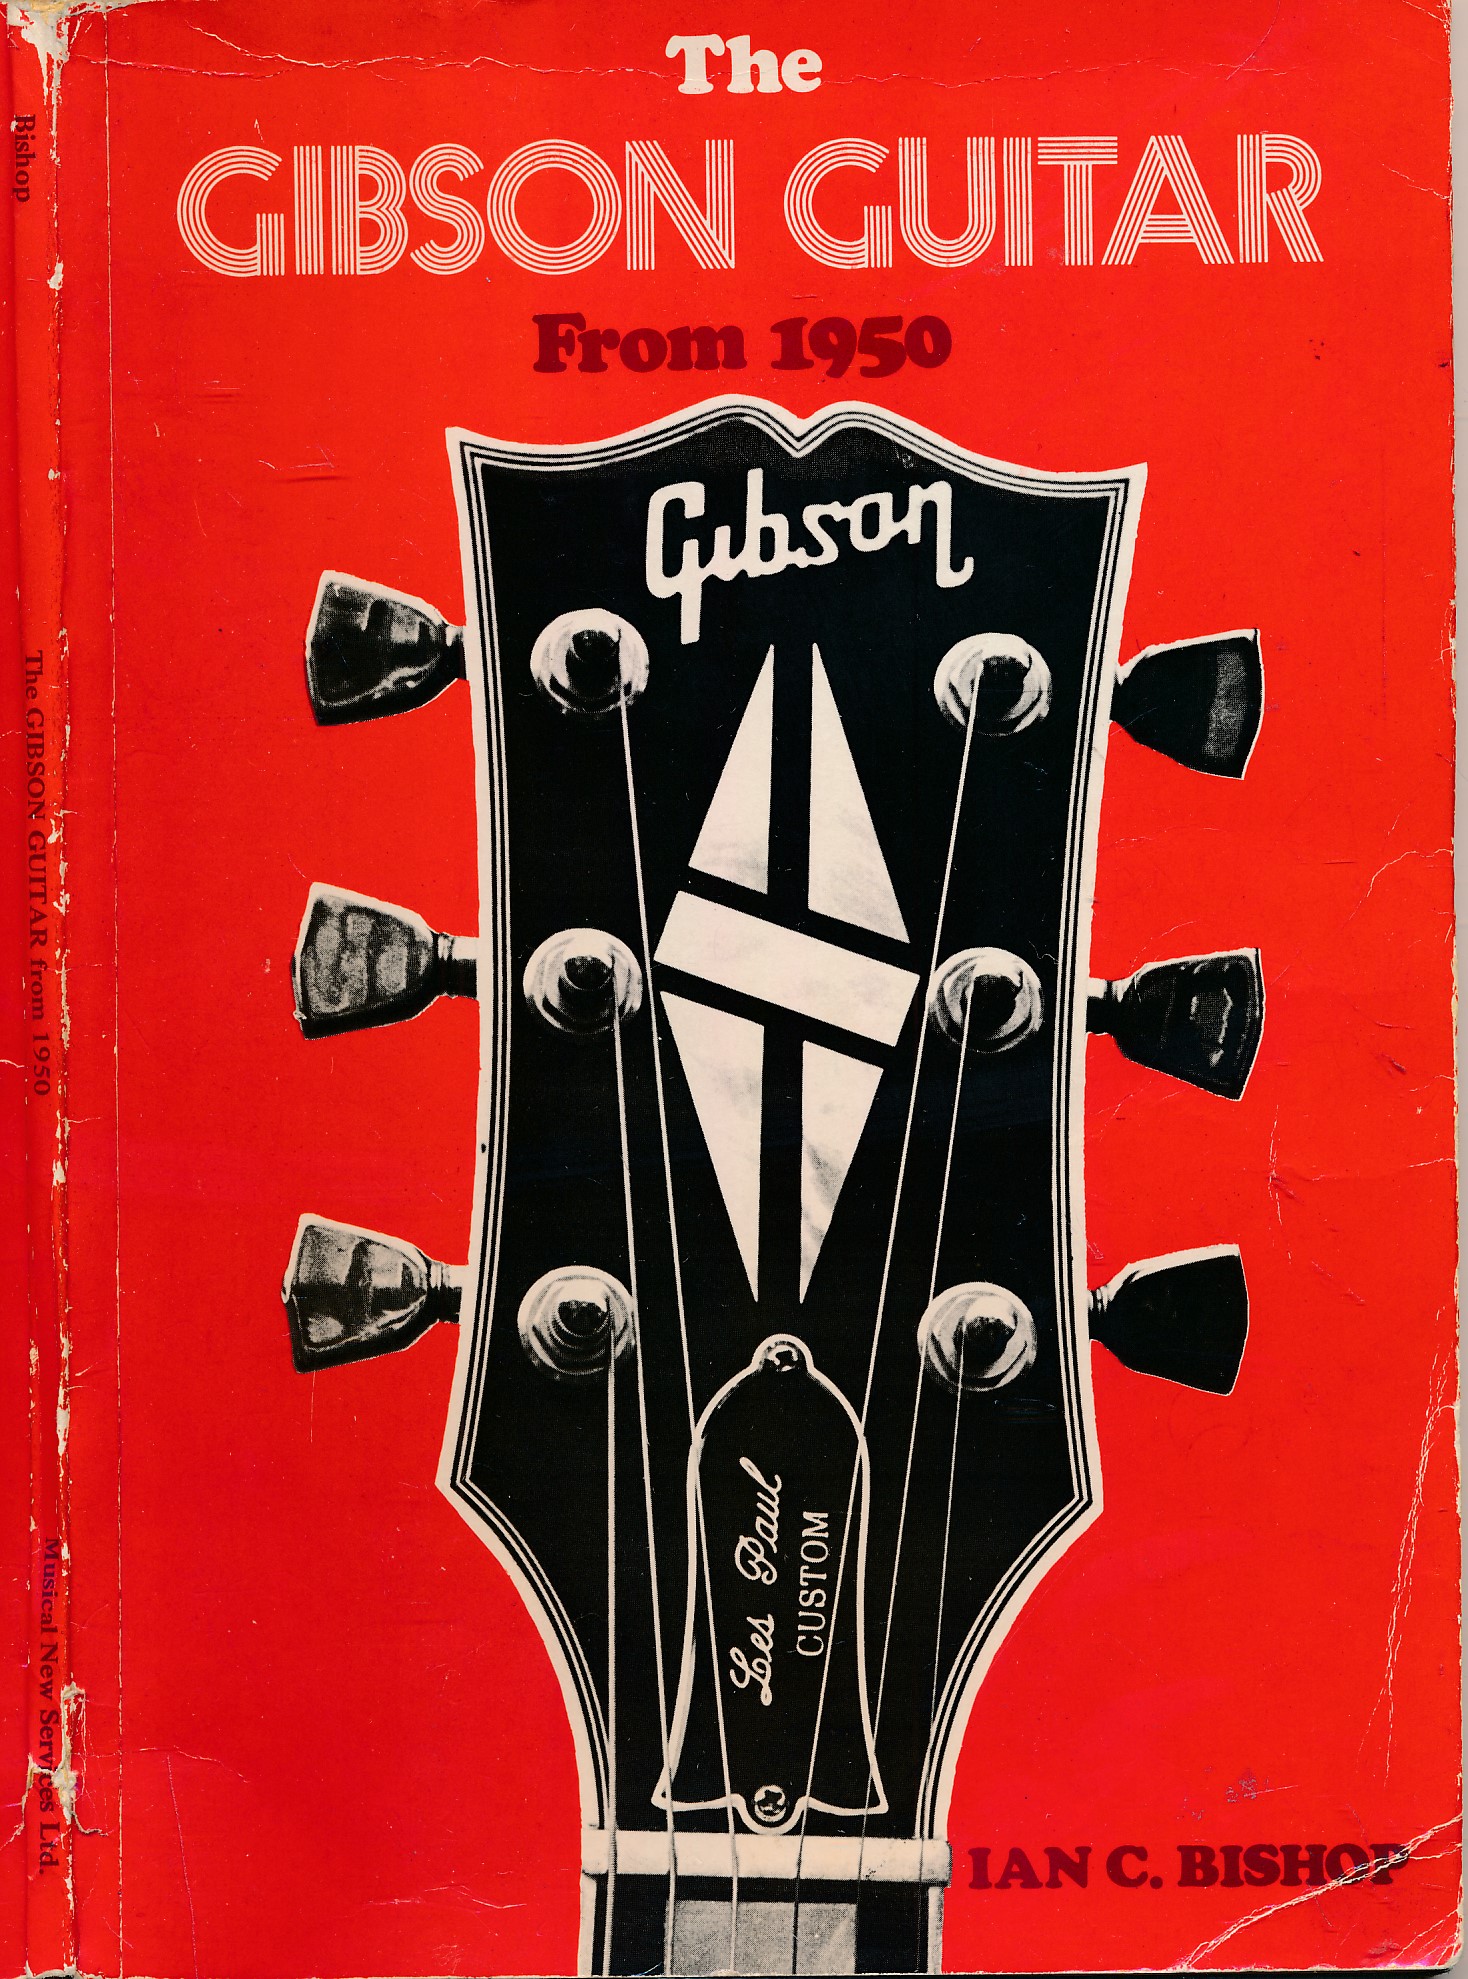 The Gibson Guitar from 1950. Vol 1.